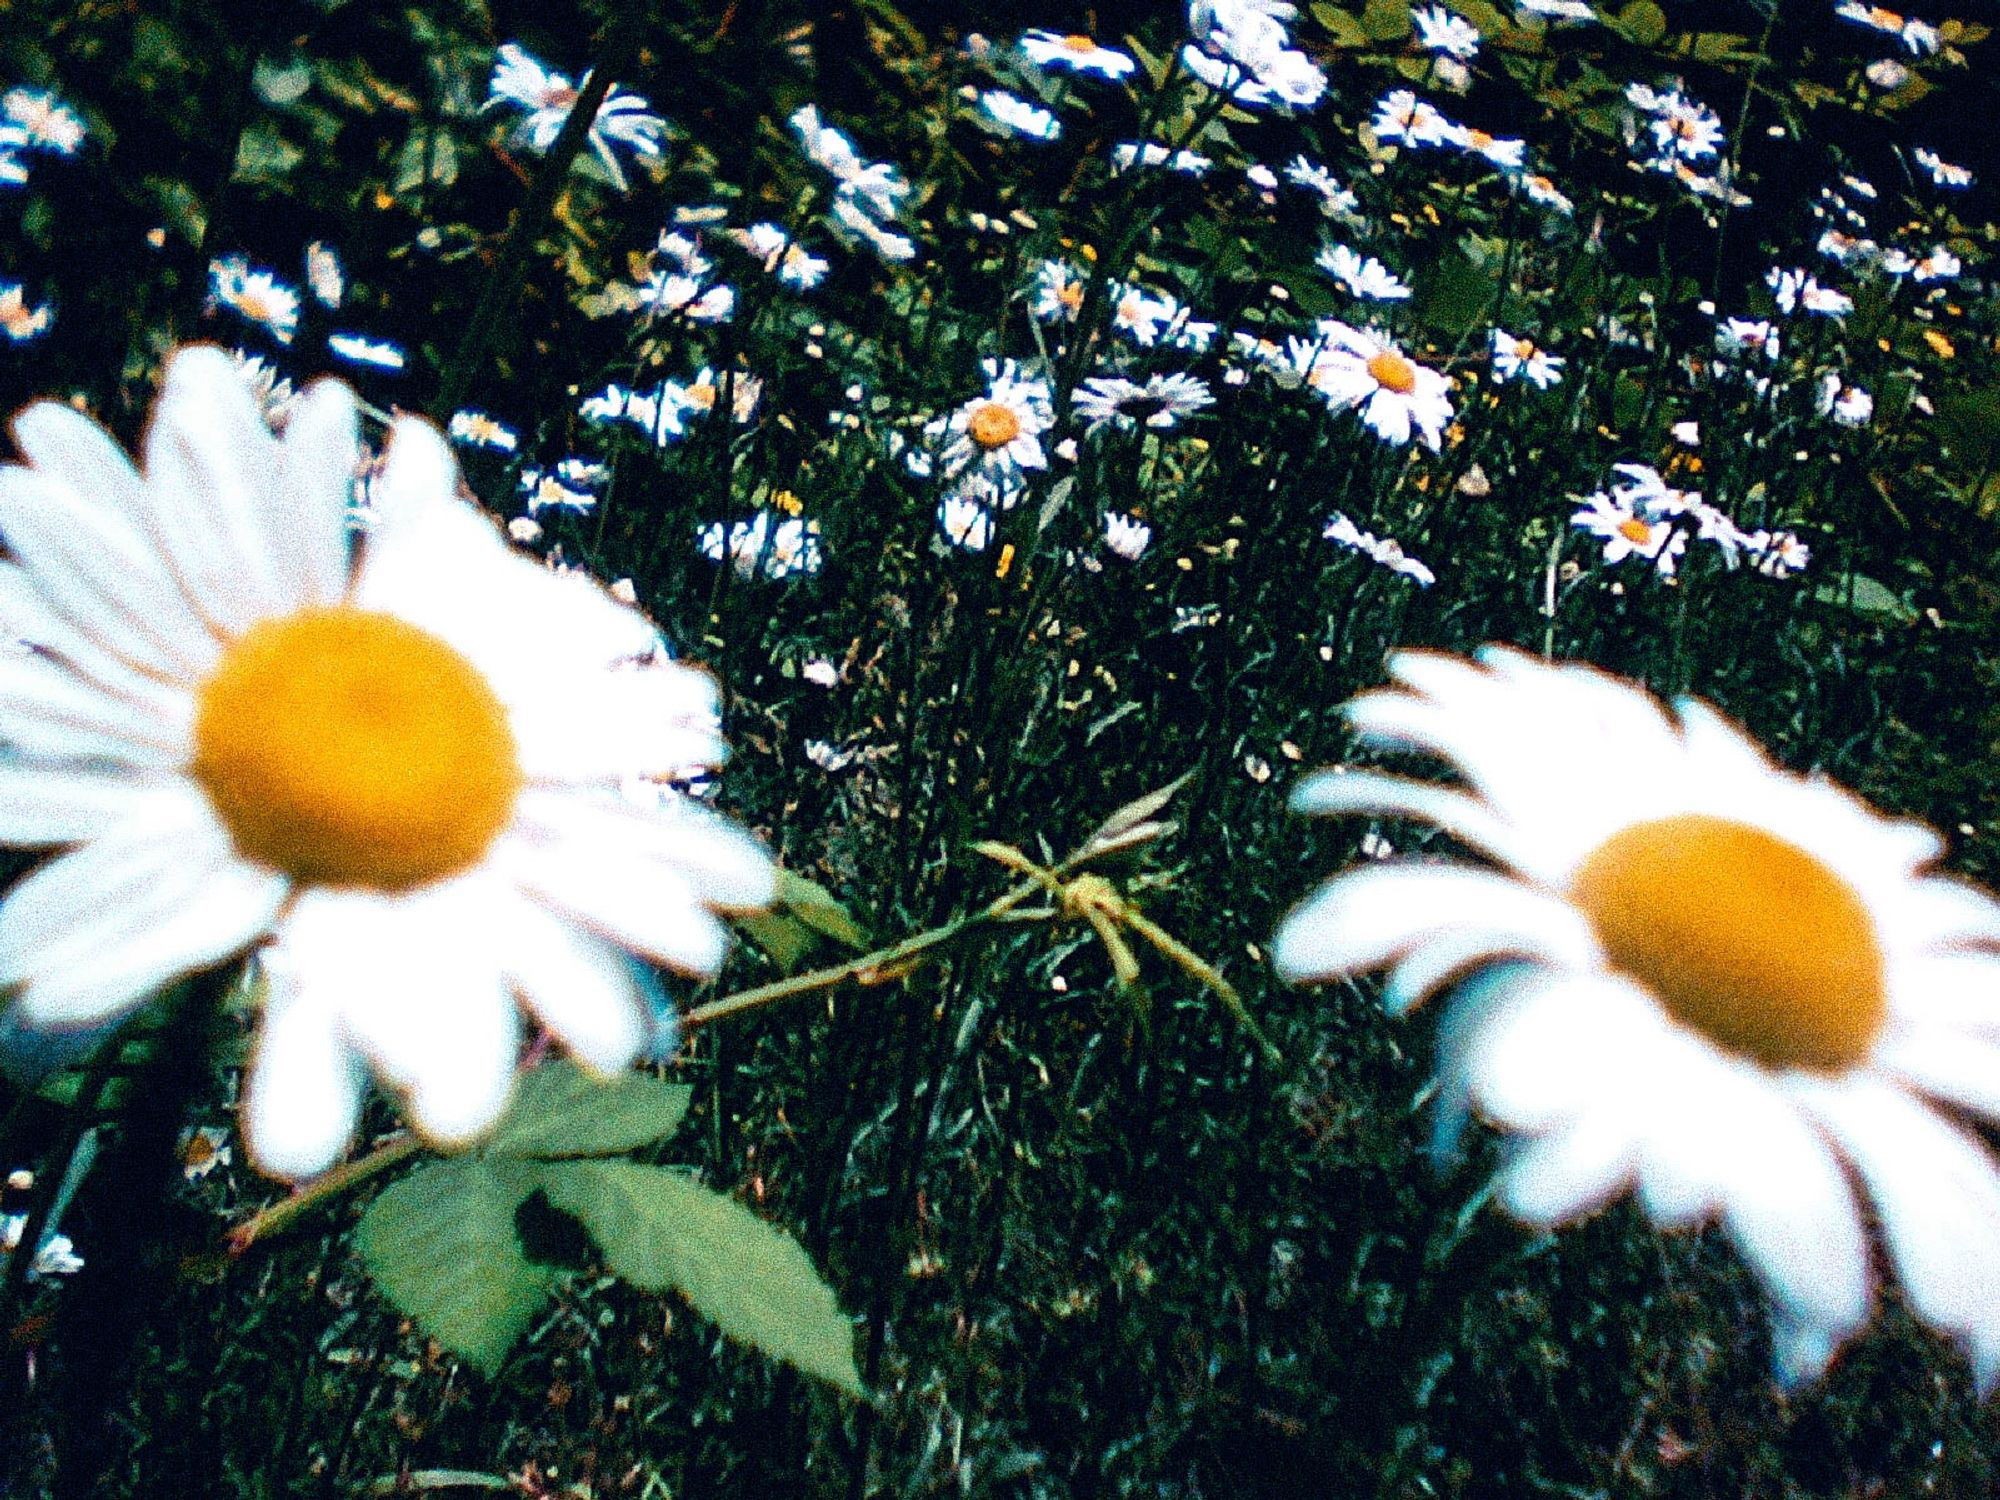 A close-up of daisies with yellow centers in a field, with some flowers in the foreground out of focus.